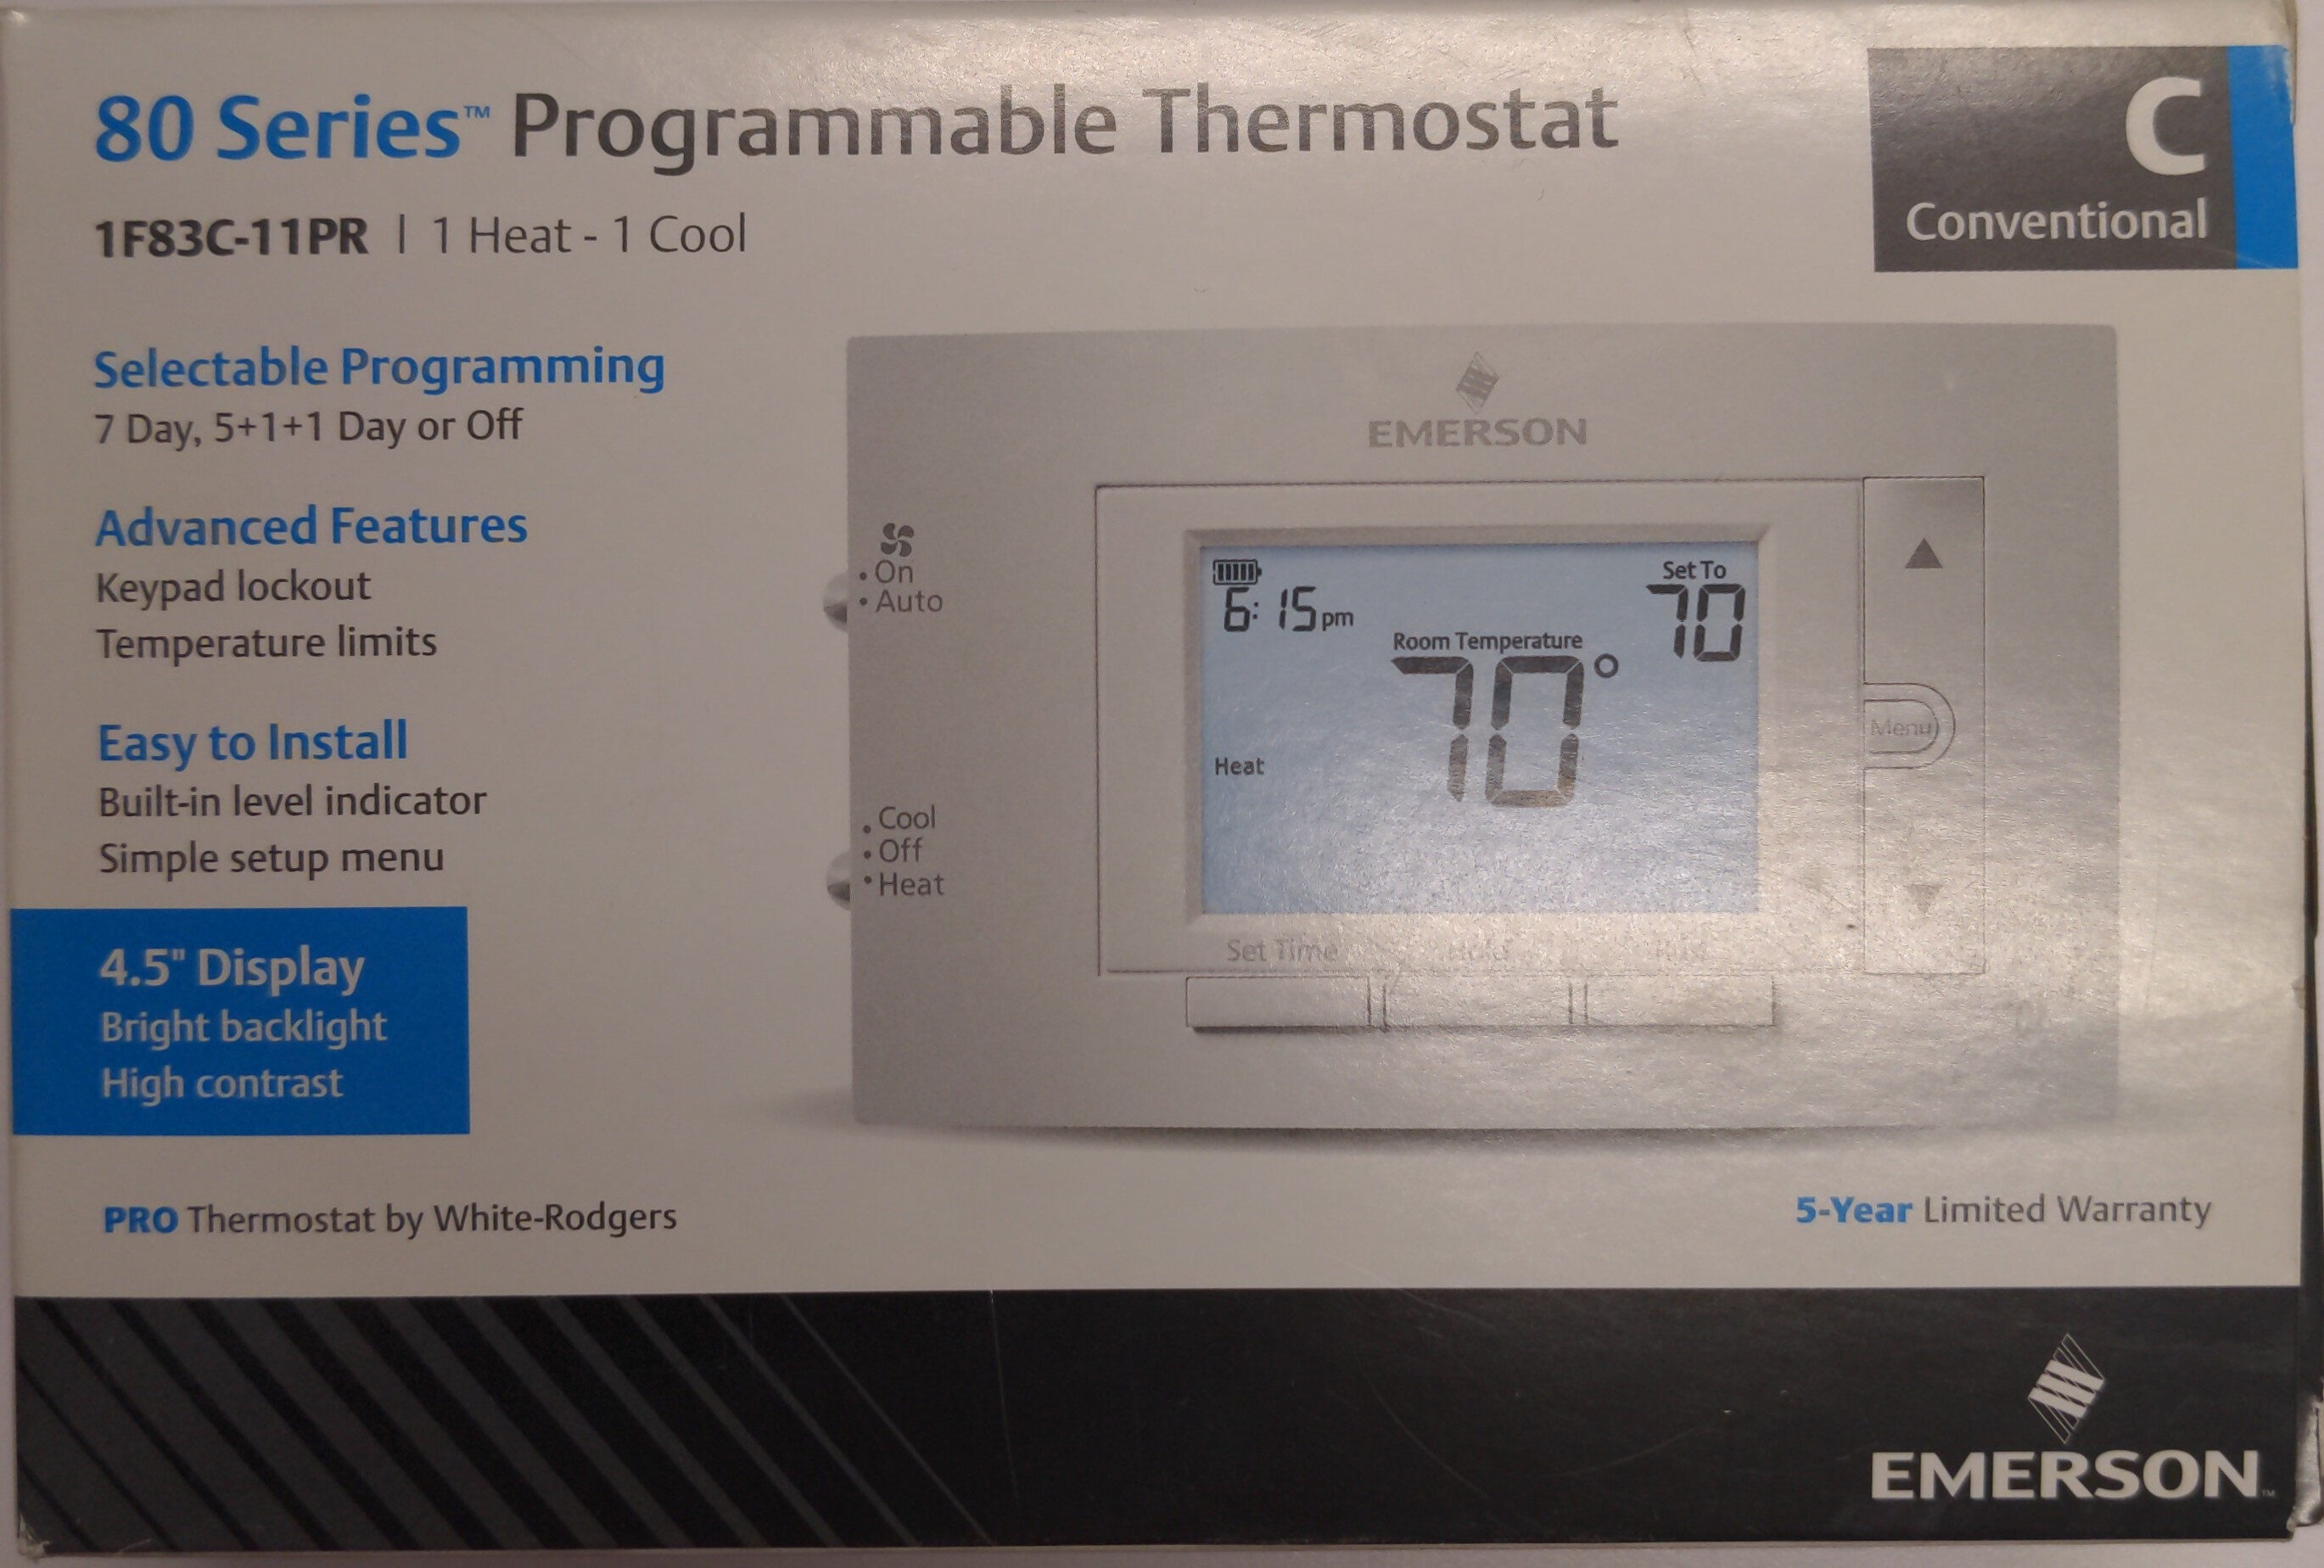 Thermostat programmable 80 Series - Product - en